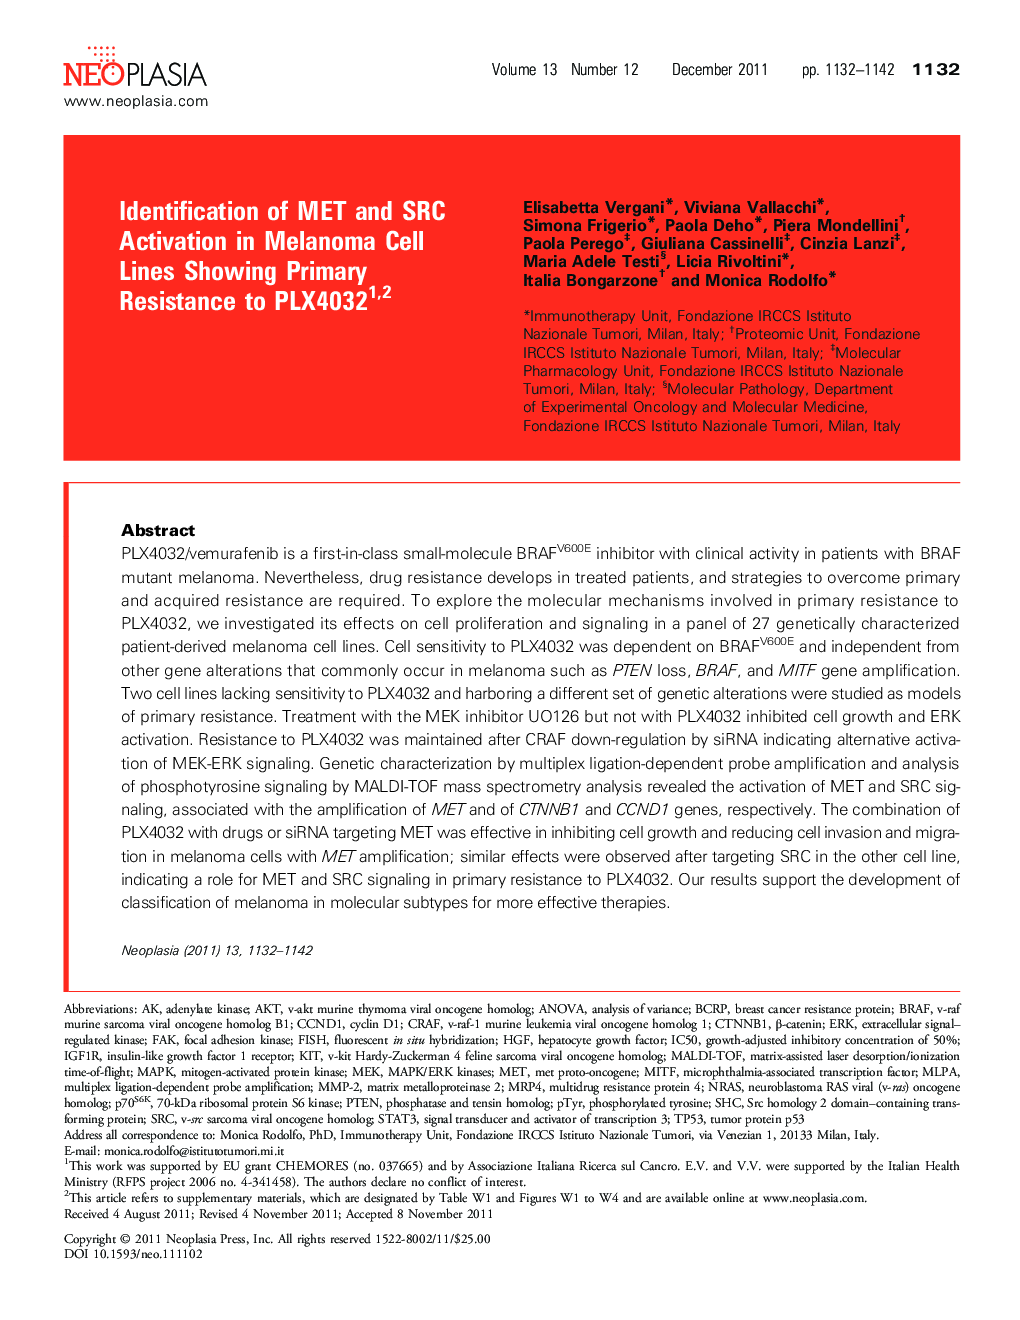 Identification of MET and SRC Activation in Melanoma Cell Lines Showing Primary Resistance to PLX4032